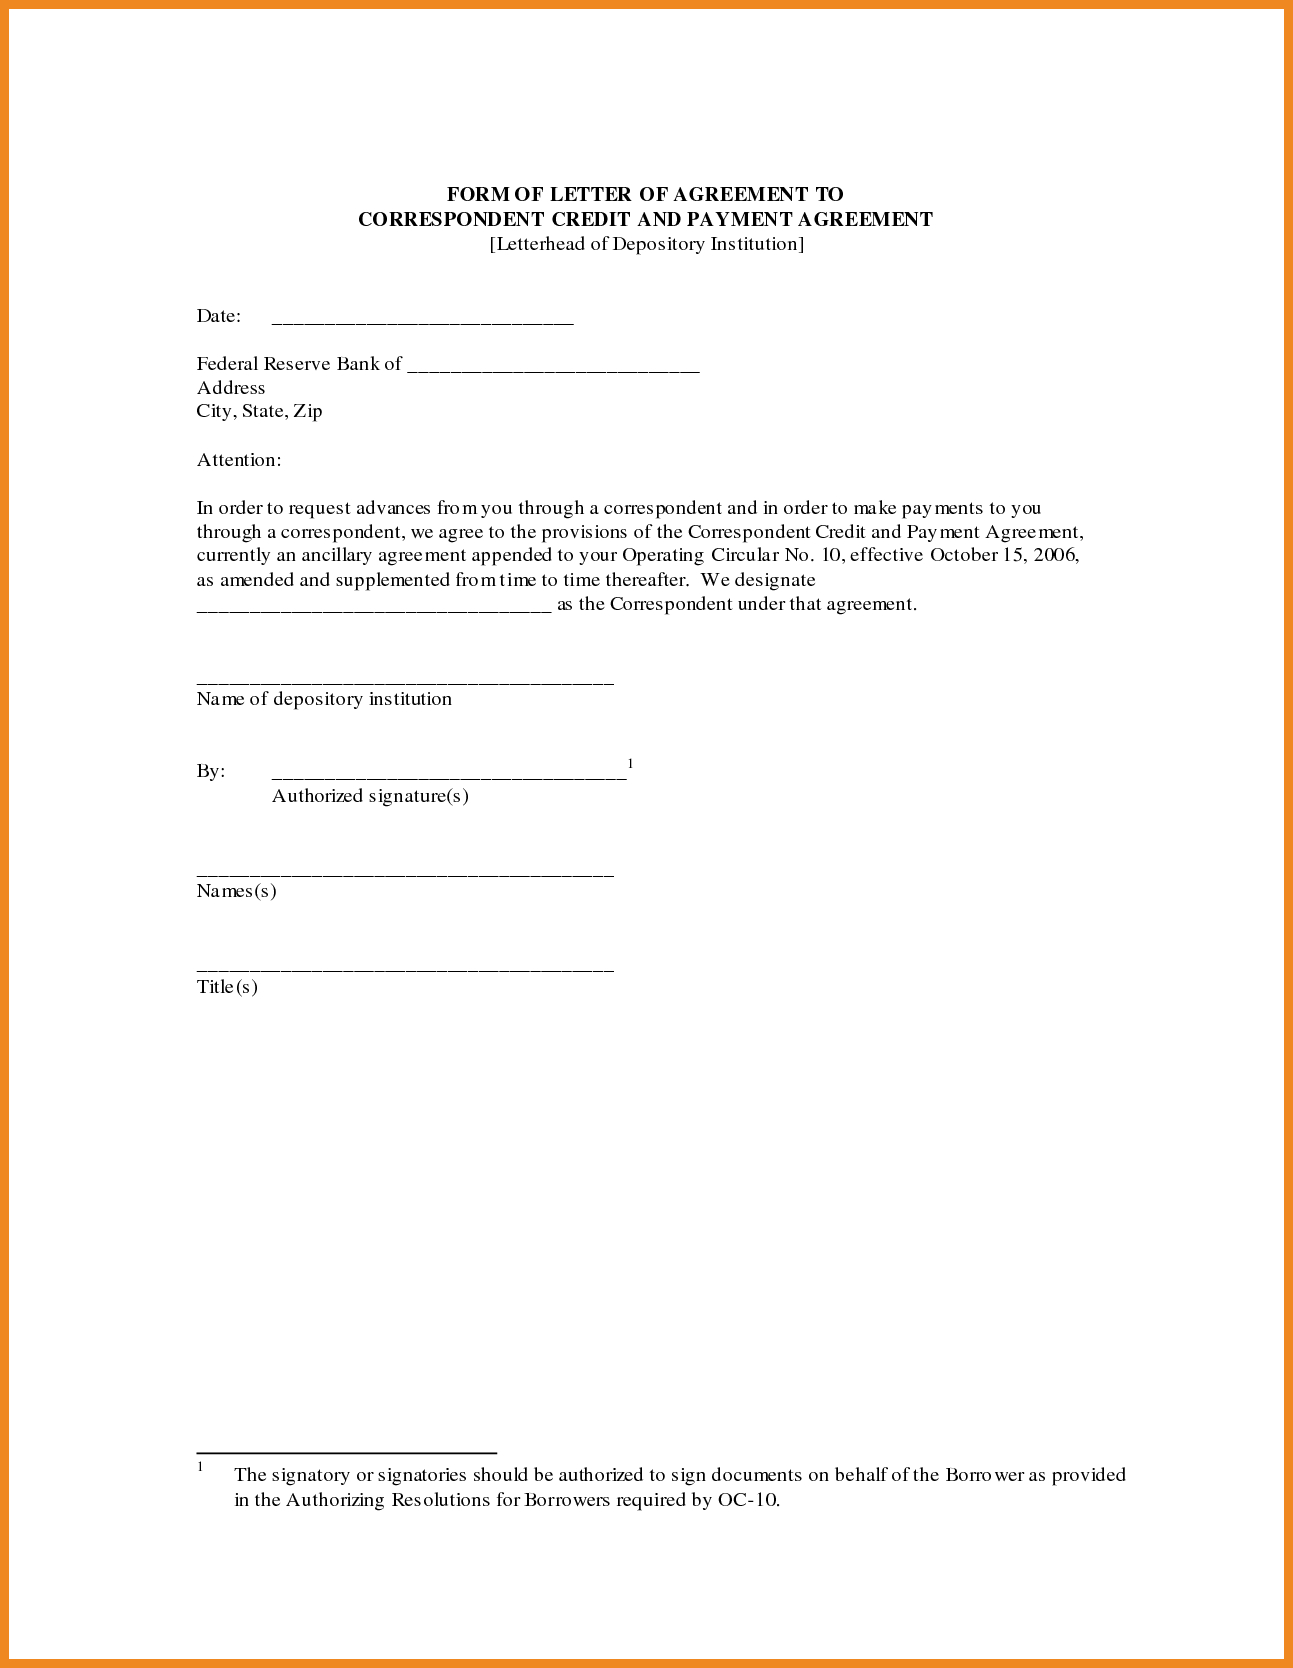 Payment Arrangement Letter Template - How to Write A Payment Agreement Letter Gallery Letter format